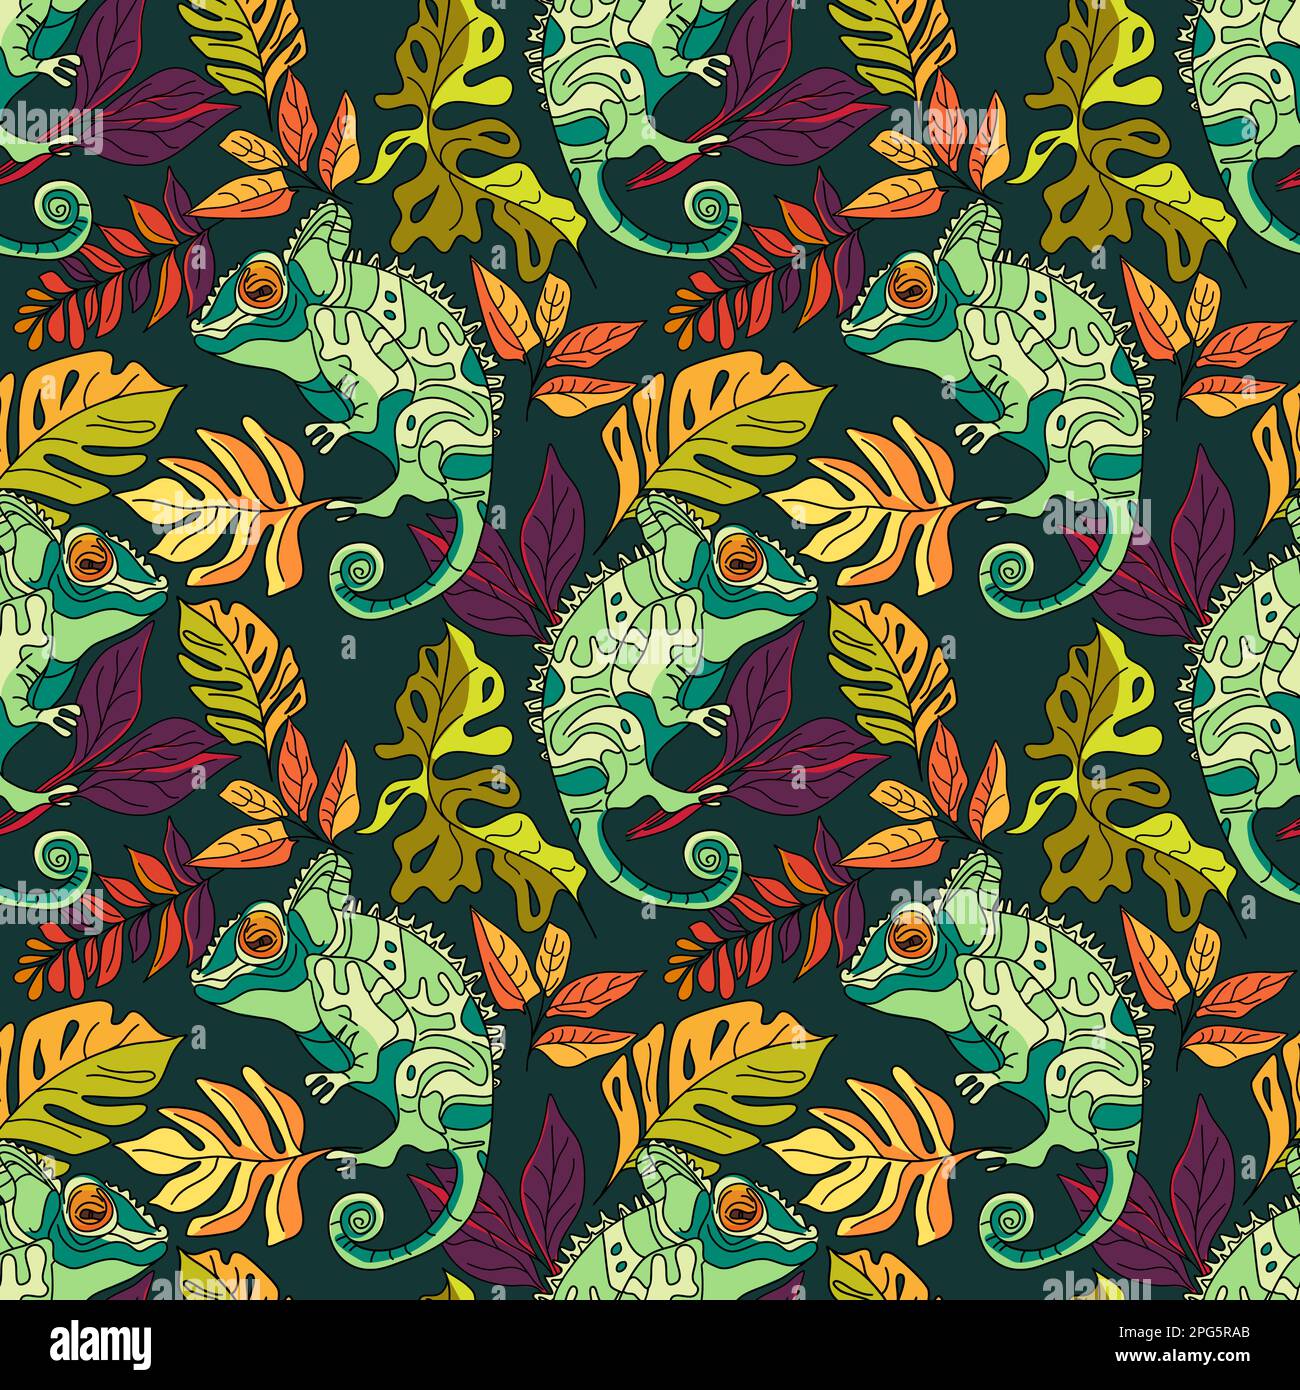 Seamless floral pattern with chameleons and tropical leaves vector illustration Stock Vector